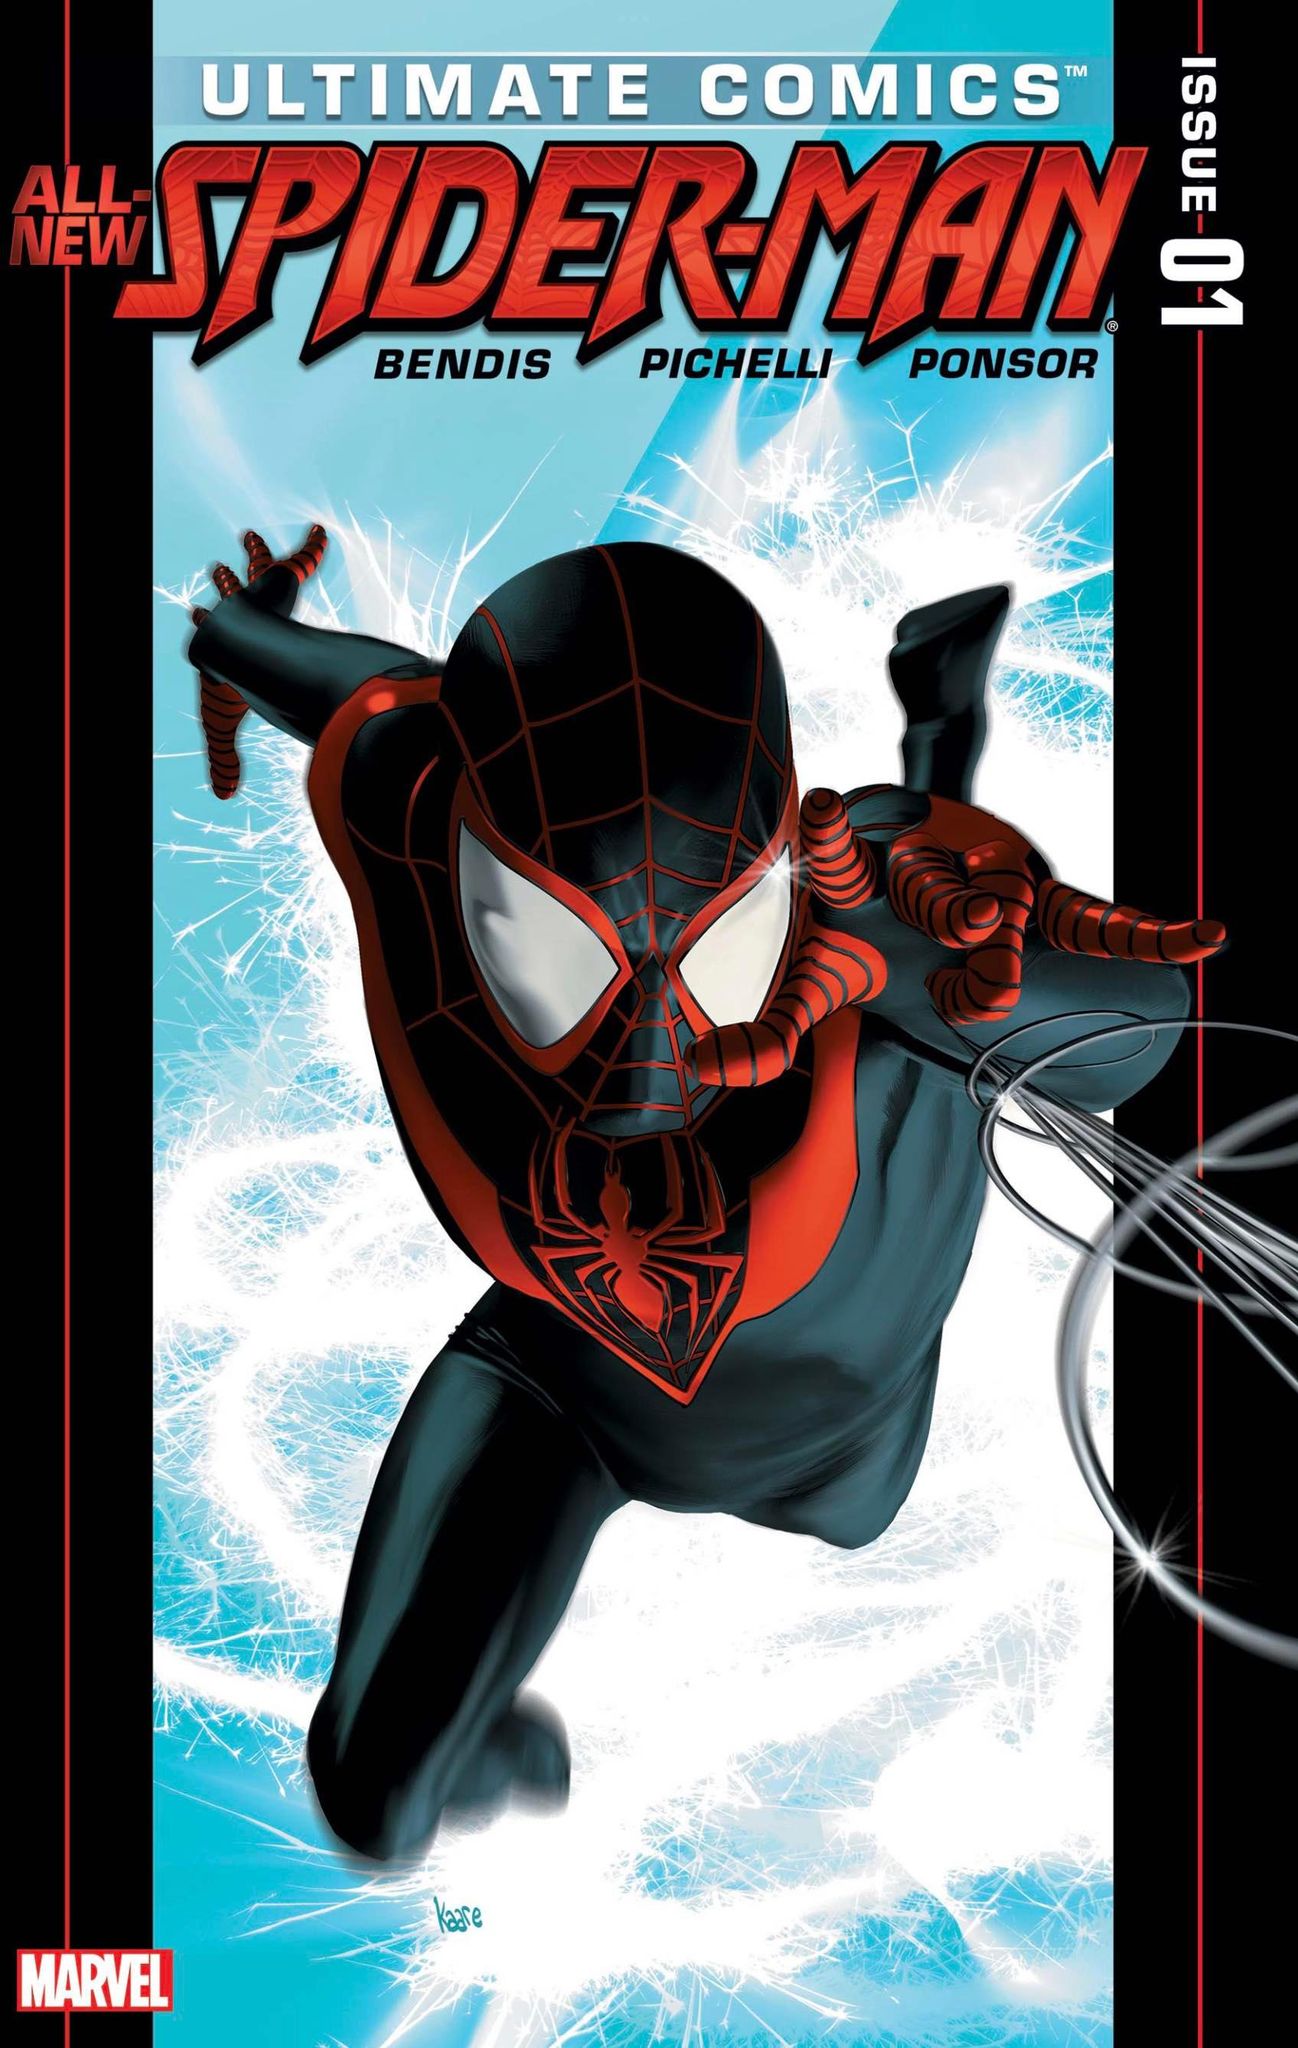 Ultimate Comics Spider-Man #1 cover